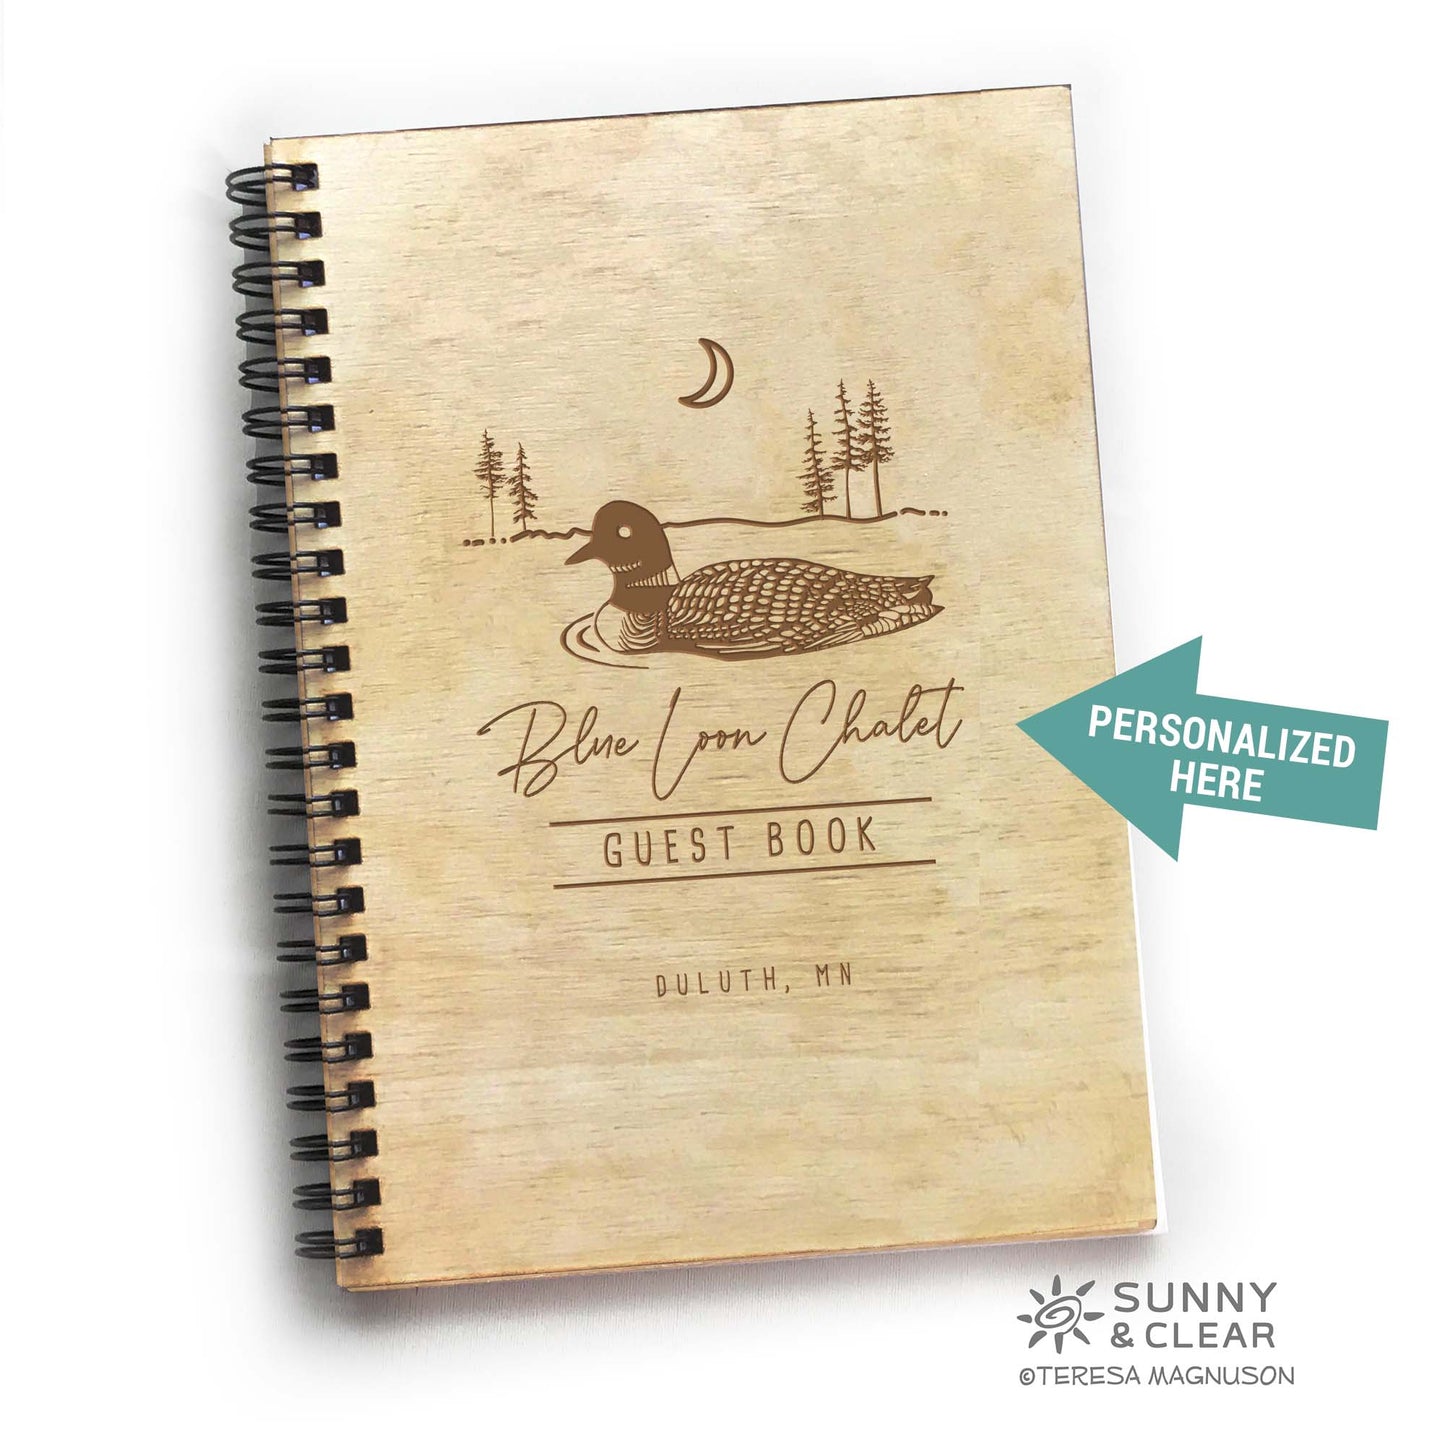 Winery Guest Book, Wine Story, AirBNB, Laser Engraved, Personalized